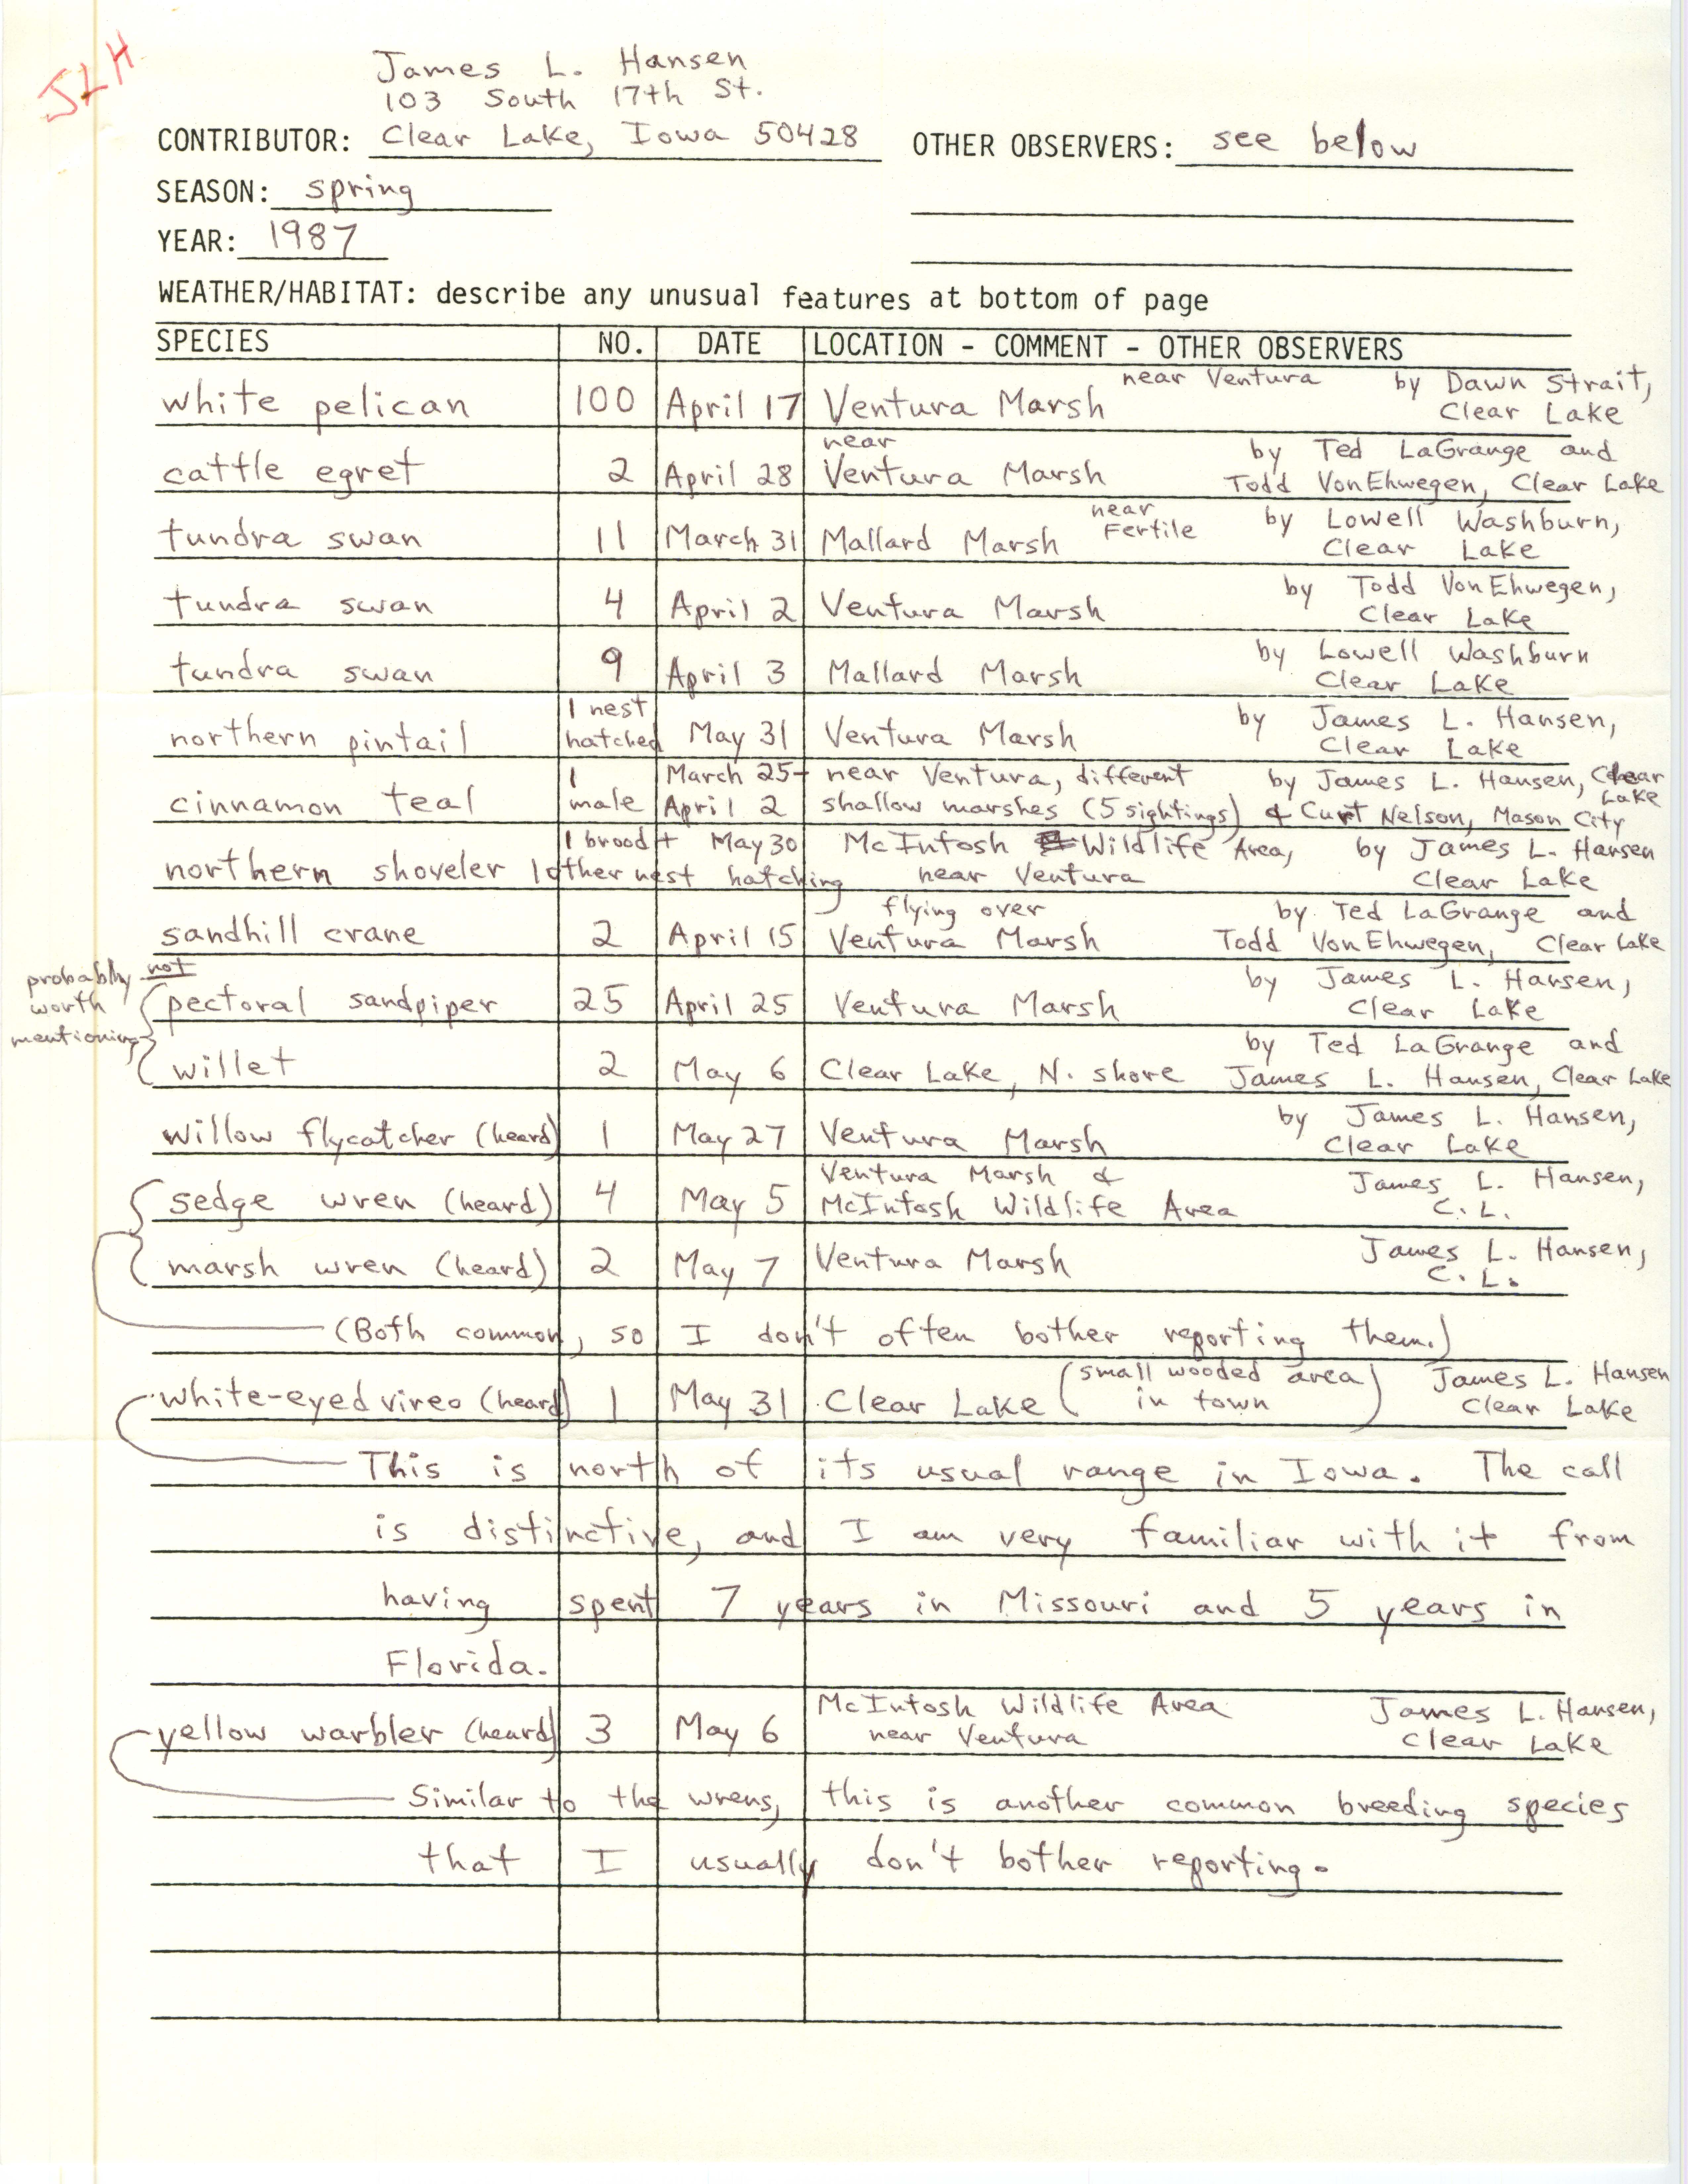 Field notes contributed by James L. Hansen, spring 1987